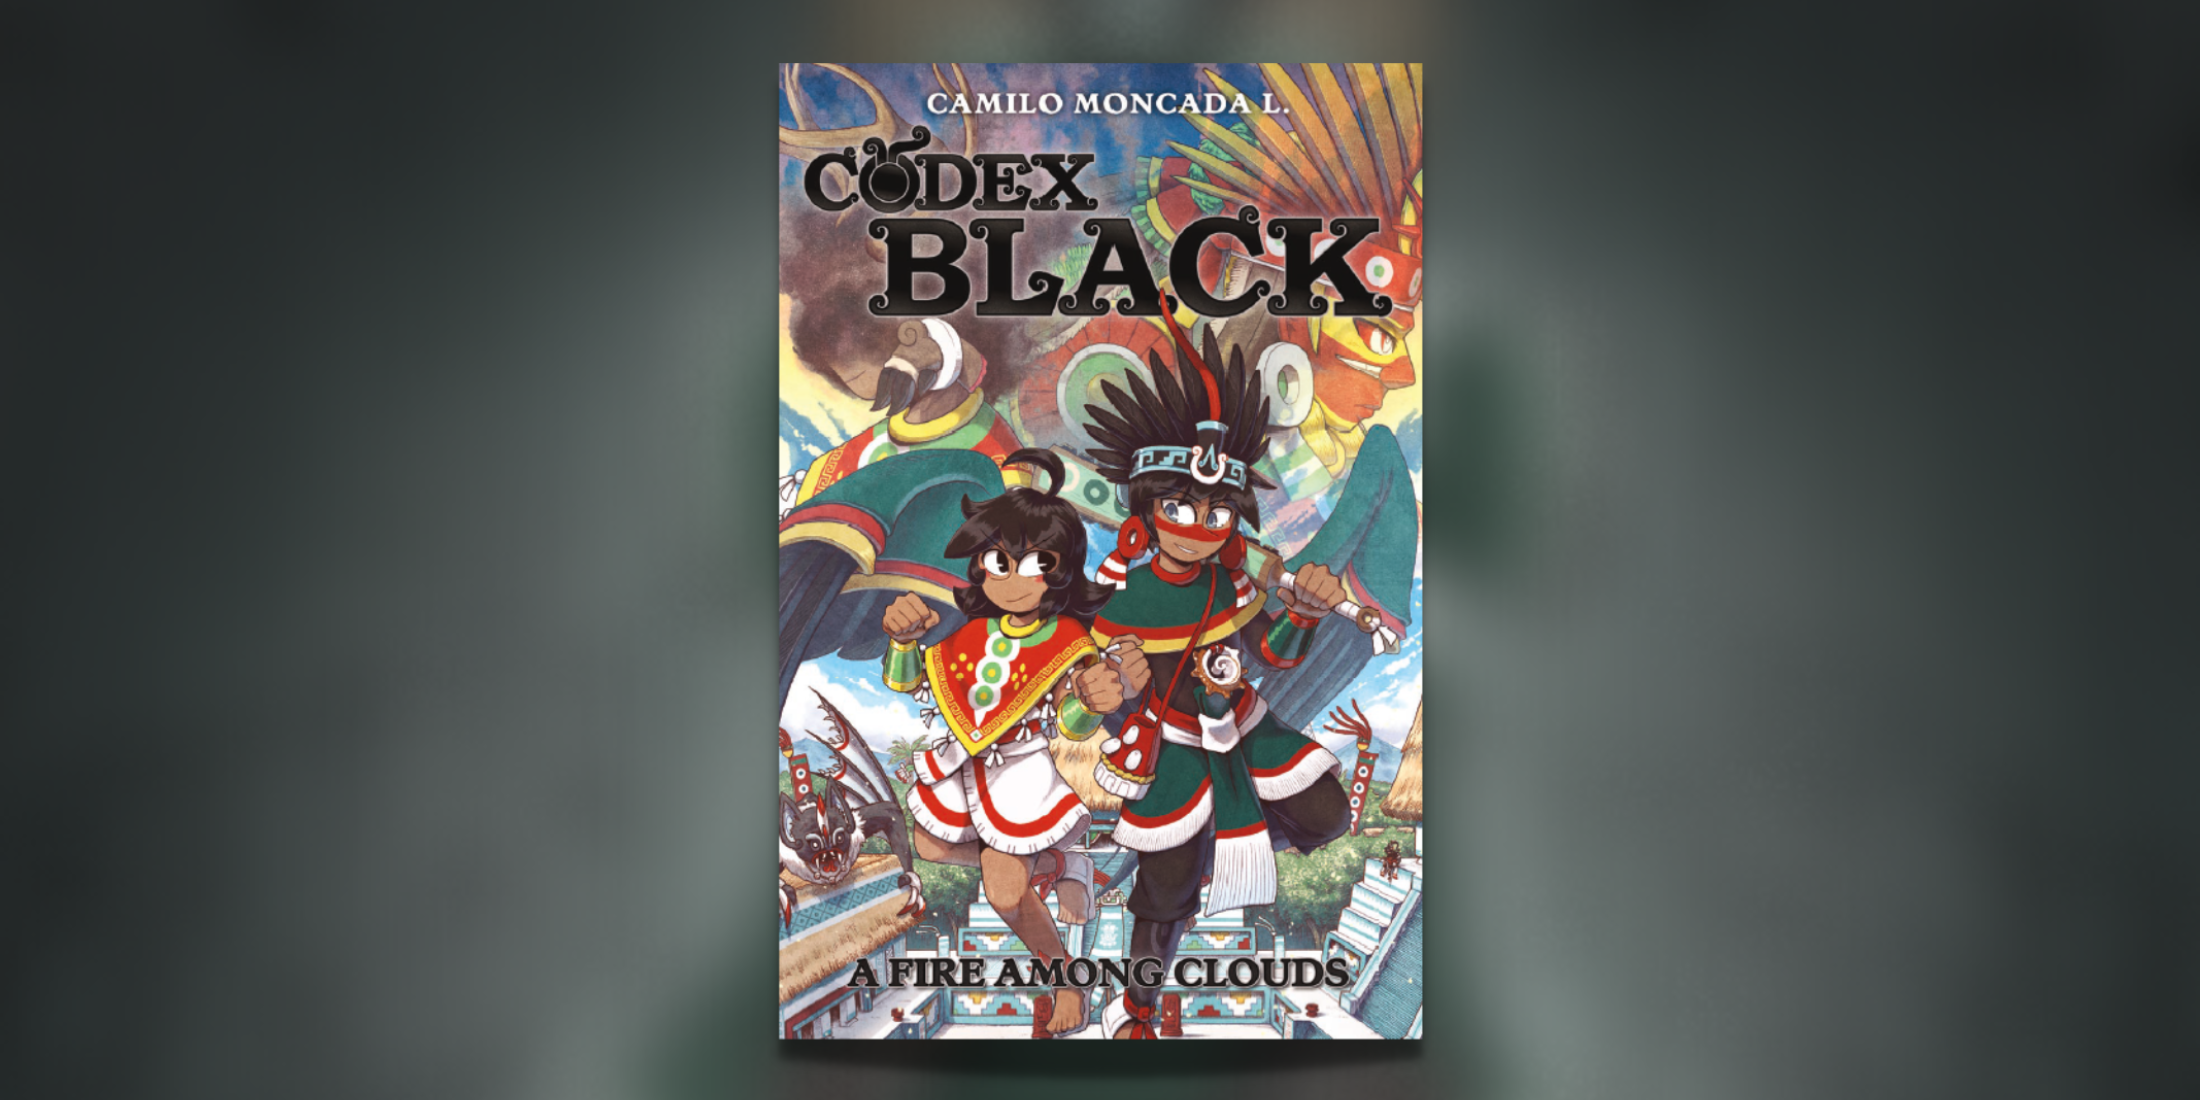 Codex Black: A Fire Among Clouds - Bow to the Will of the Gods in IDW's Upcoming Fantasy Graphic Novel